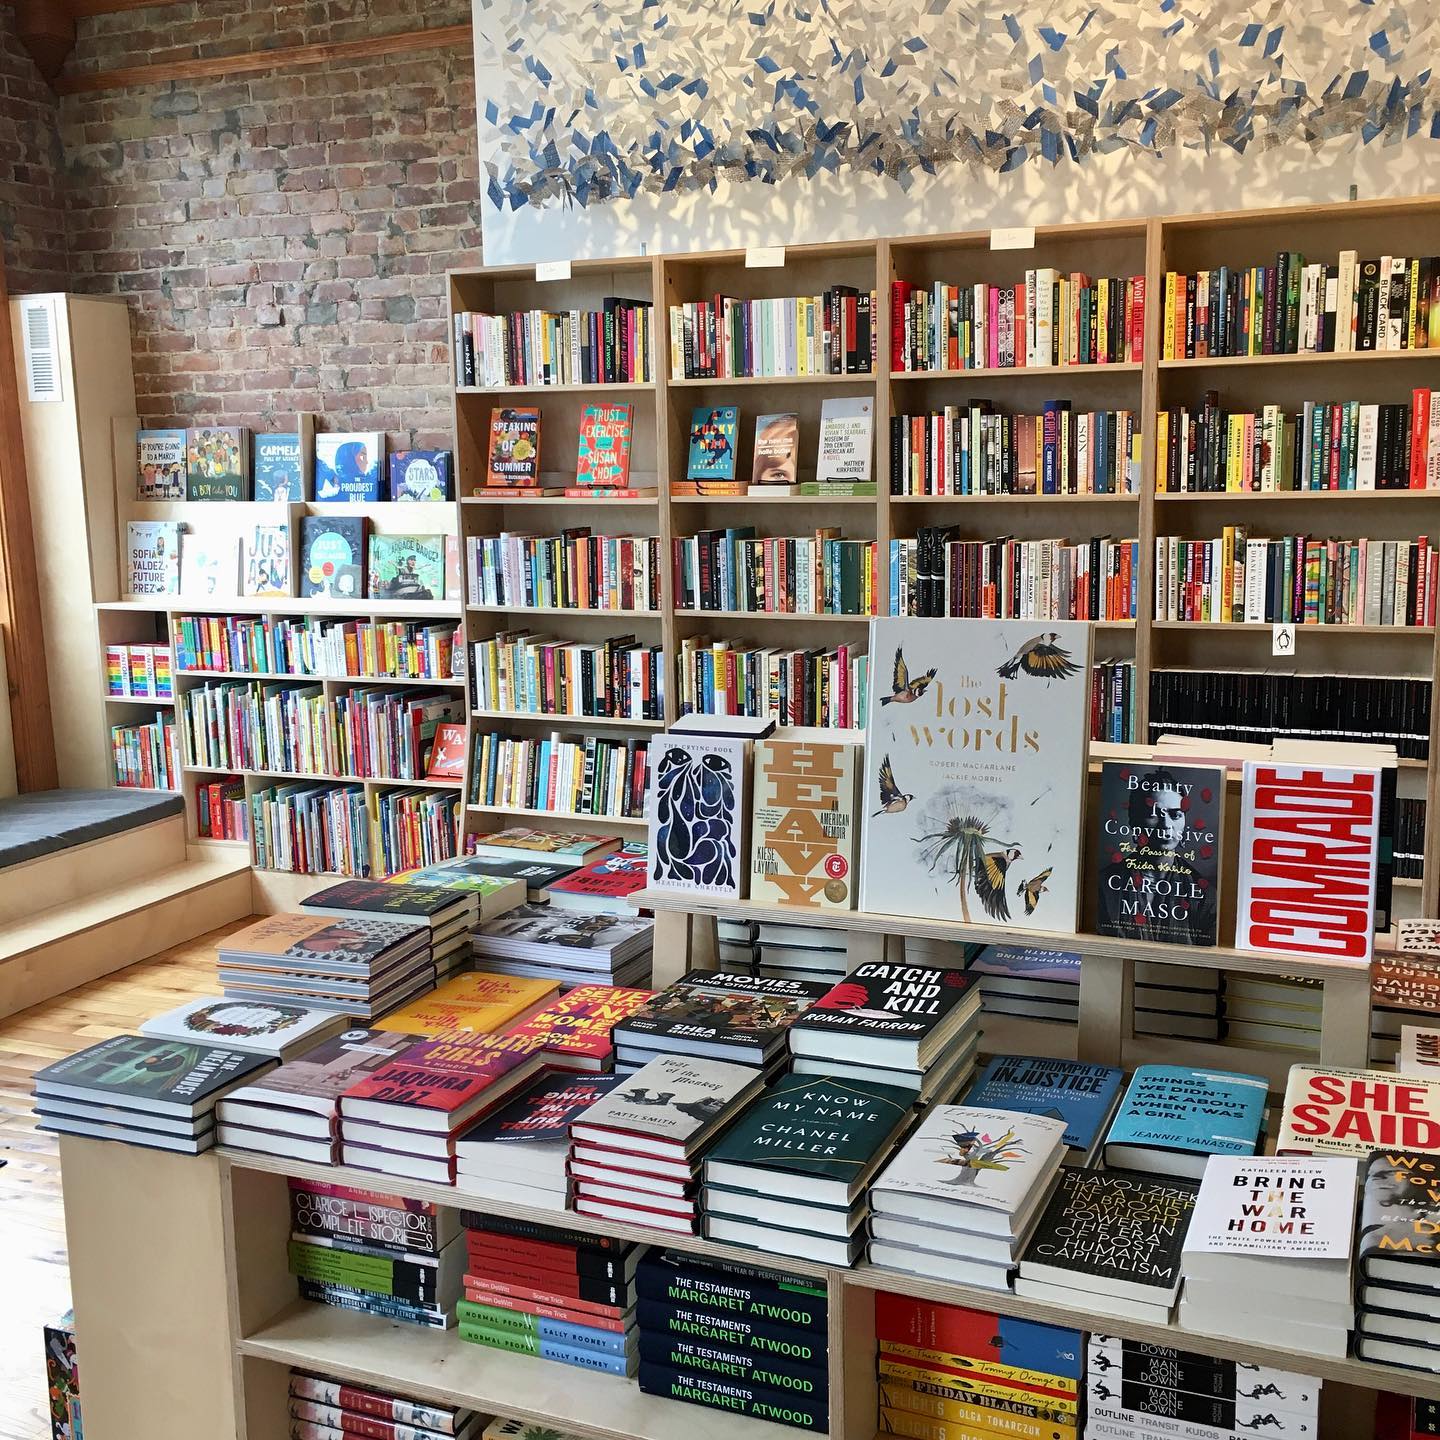 Something for everyone at Downbound Books